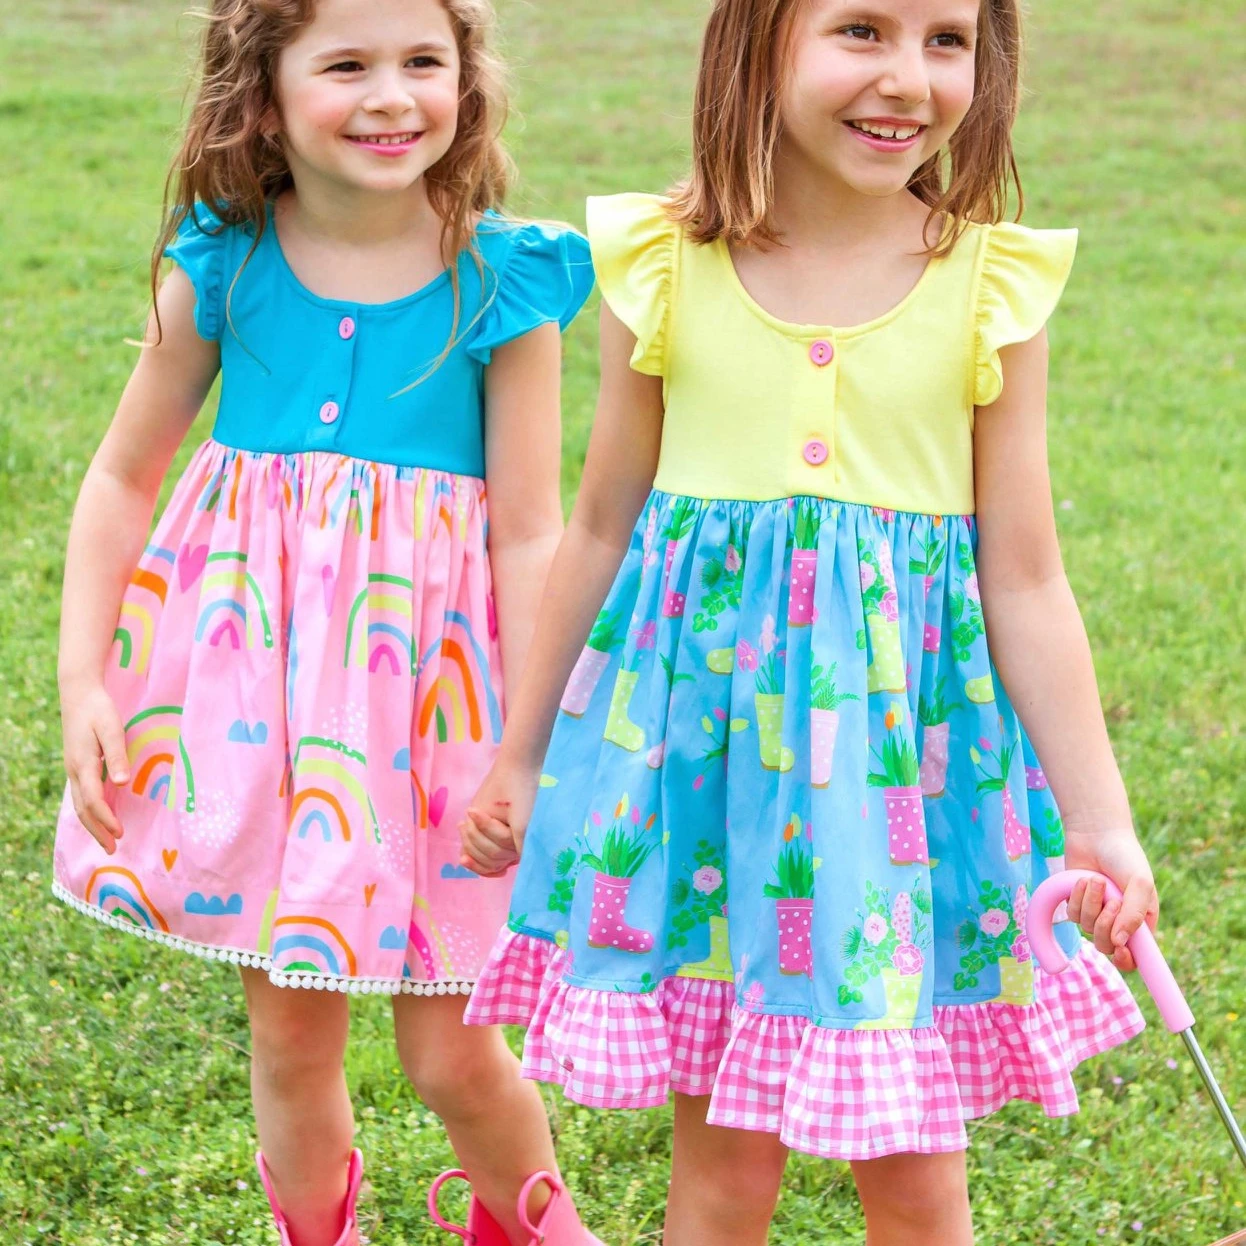 

Toddler Cotton Dress Top Children Boutique Clothing Sets Pretty Kids Outfits